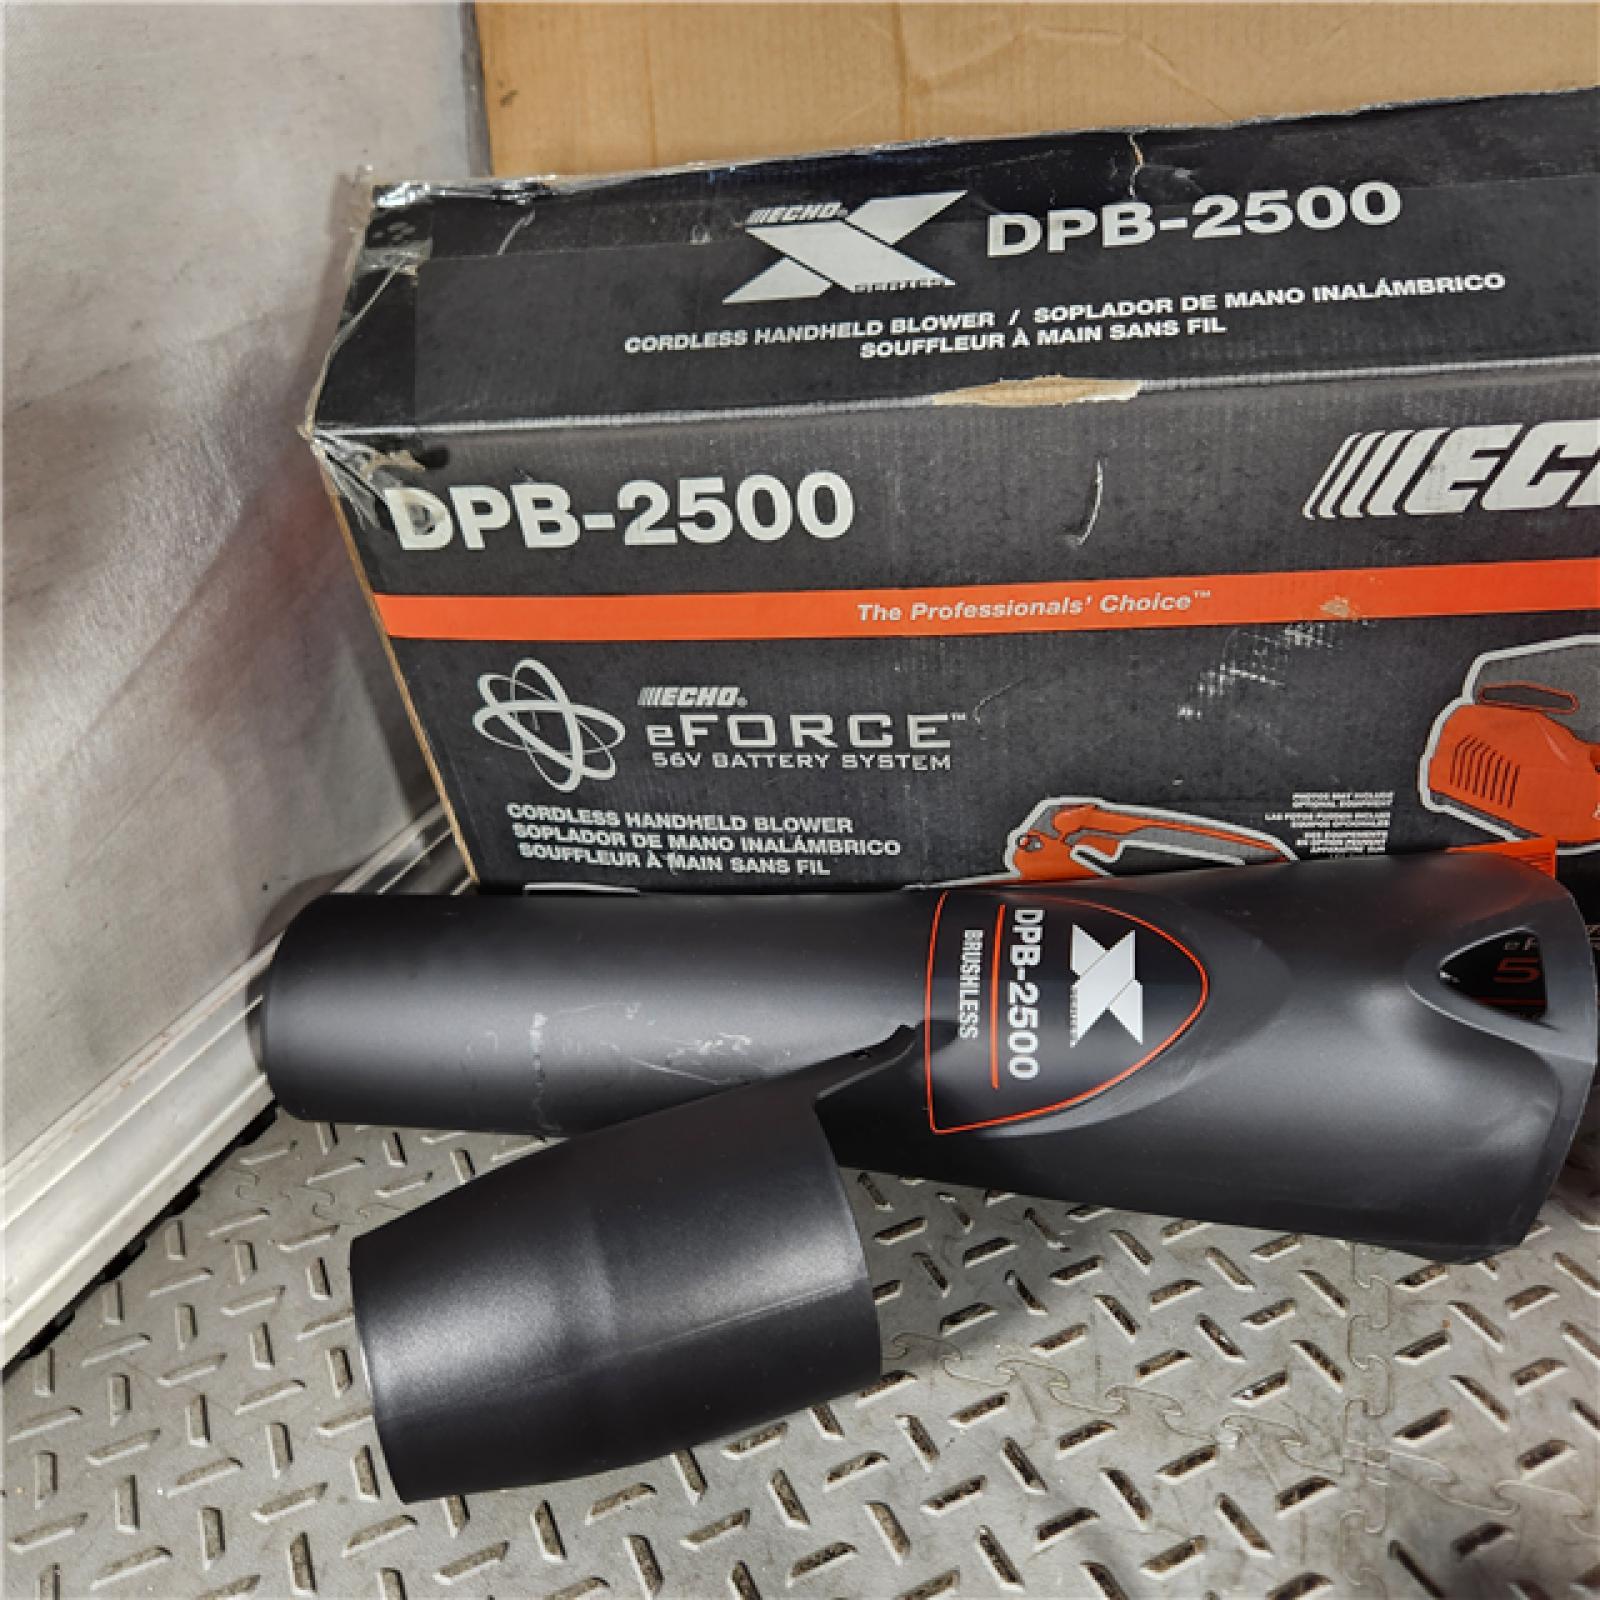 Houston Location - AS-IS Echo EFORCE 56V X Series 151 MPH 526 CFM Cordless Battery Handheld Leaf Blower with 2.5Ah Battery and Charger - Appears IN GOOD Condition